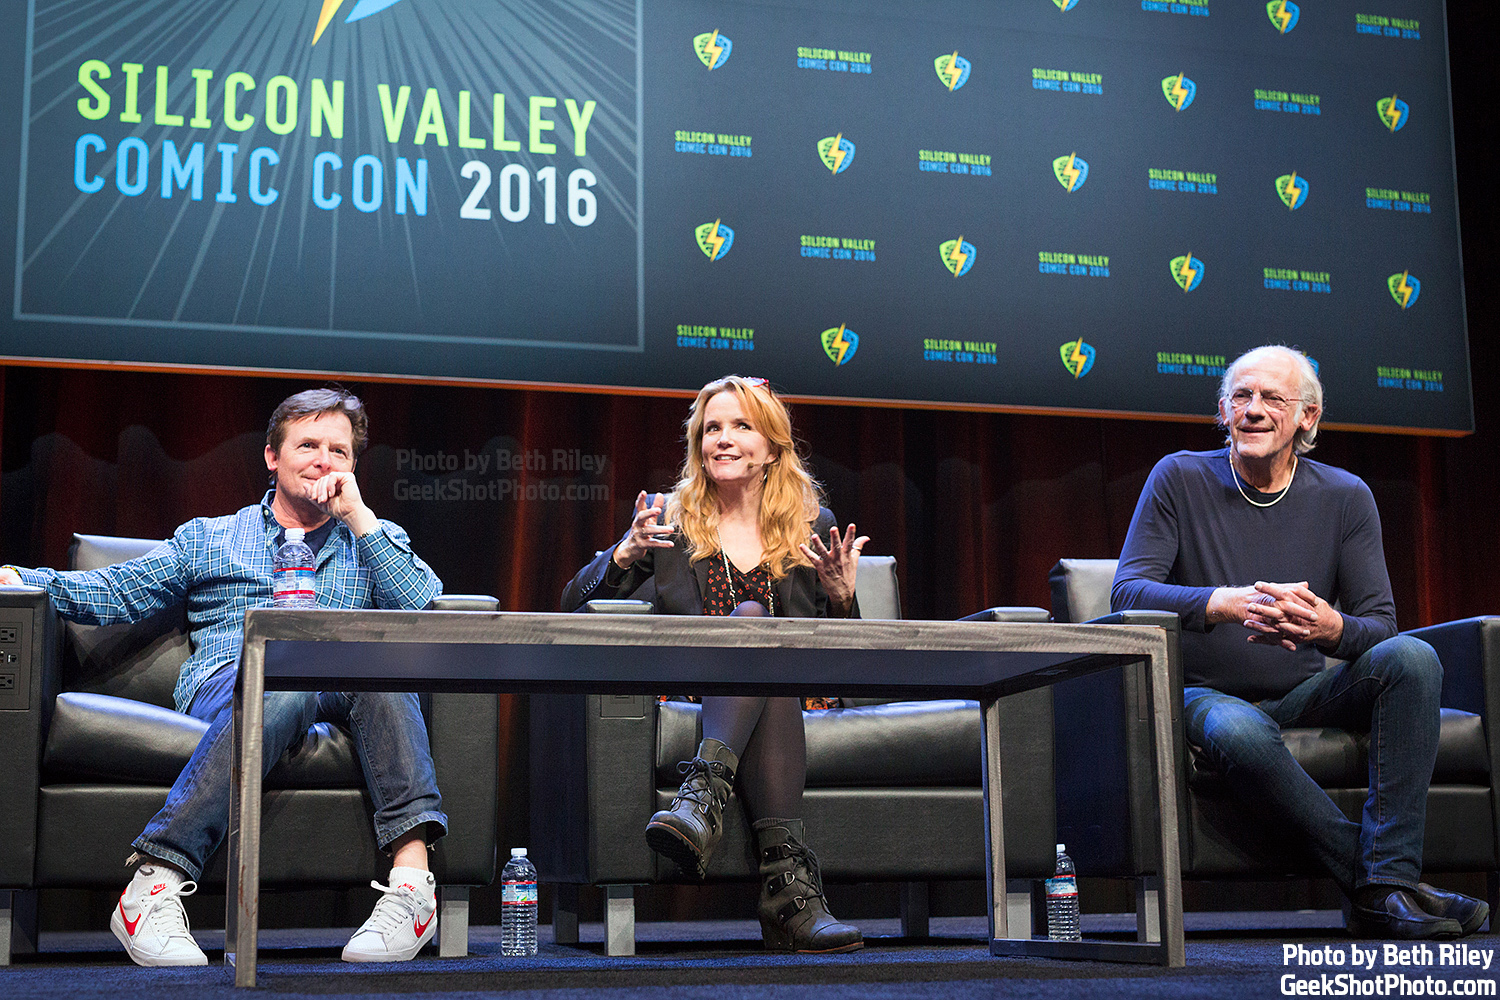 GeekShot Exclusive Photo Series Vol. 3 (Week 9) - Silicon Valley Comic Con Back to the Future Michael J Fox Lea Thompson Christopher Lloyd Marty McFly Lorraine McFly Doc Brown